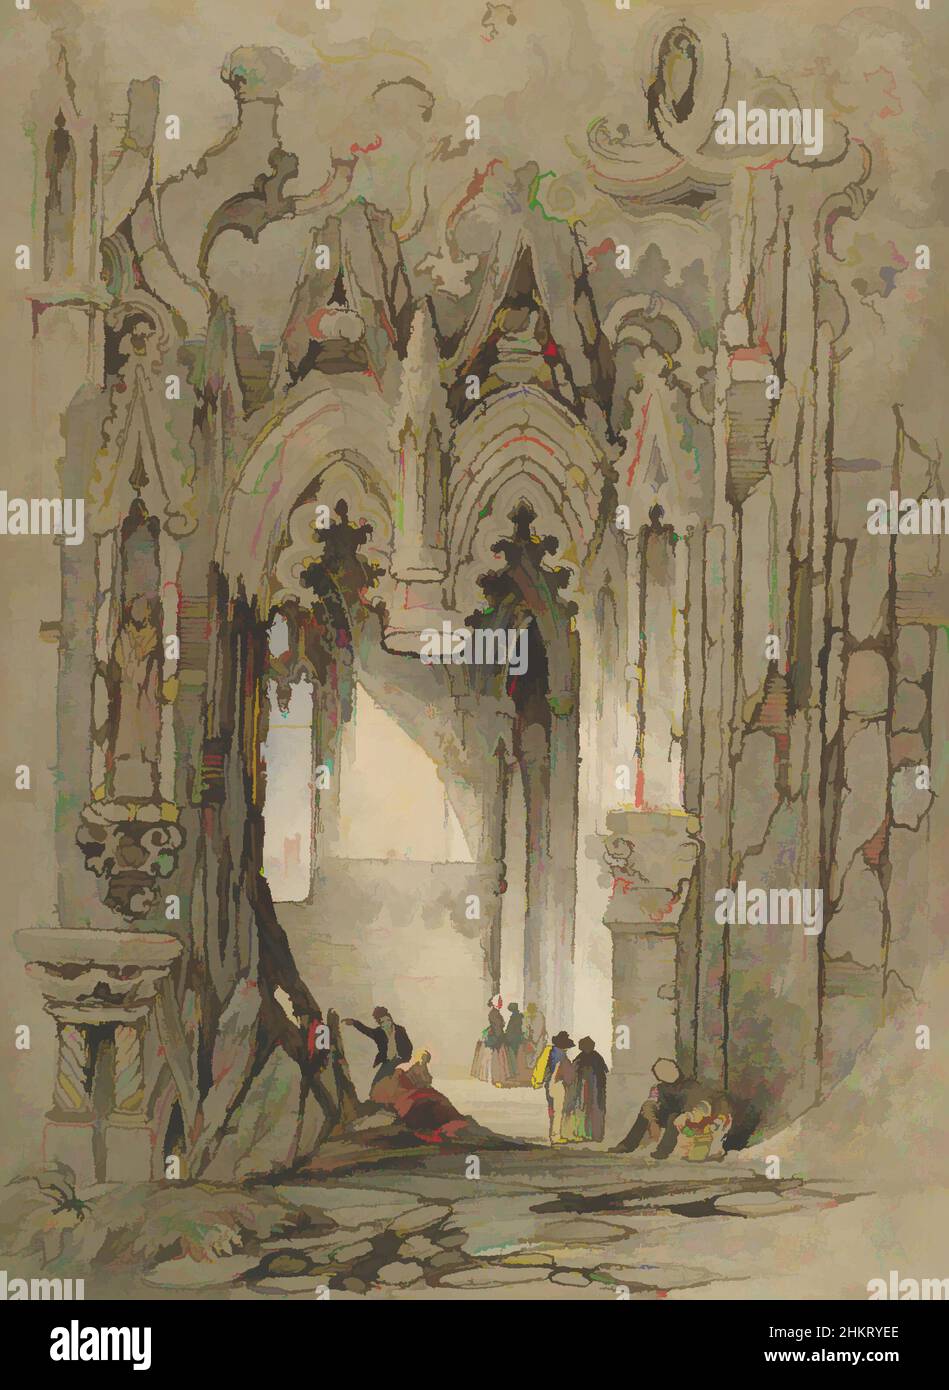 Art inspired by Interior of ruined church, Harry Willson, 1844, England, Classic works modernized by Artotop with a splash of modernity. Shapes, color and value, eye-catching visual impact on art. Emotions through freedom of artworks in a contemporary way. A timeless message pursuing a wildly creative new direction. Artists turning to the digital medium and creating the Artotop NFT Stock Photo